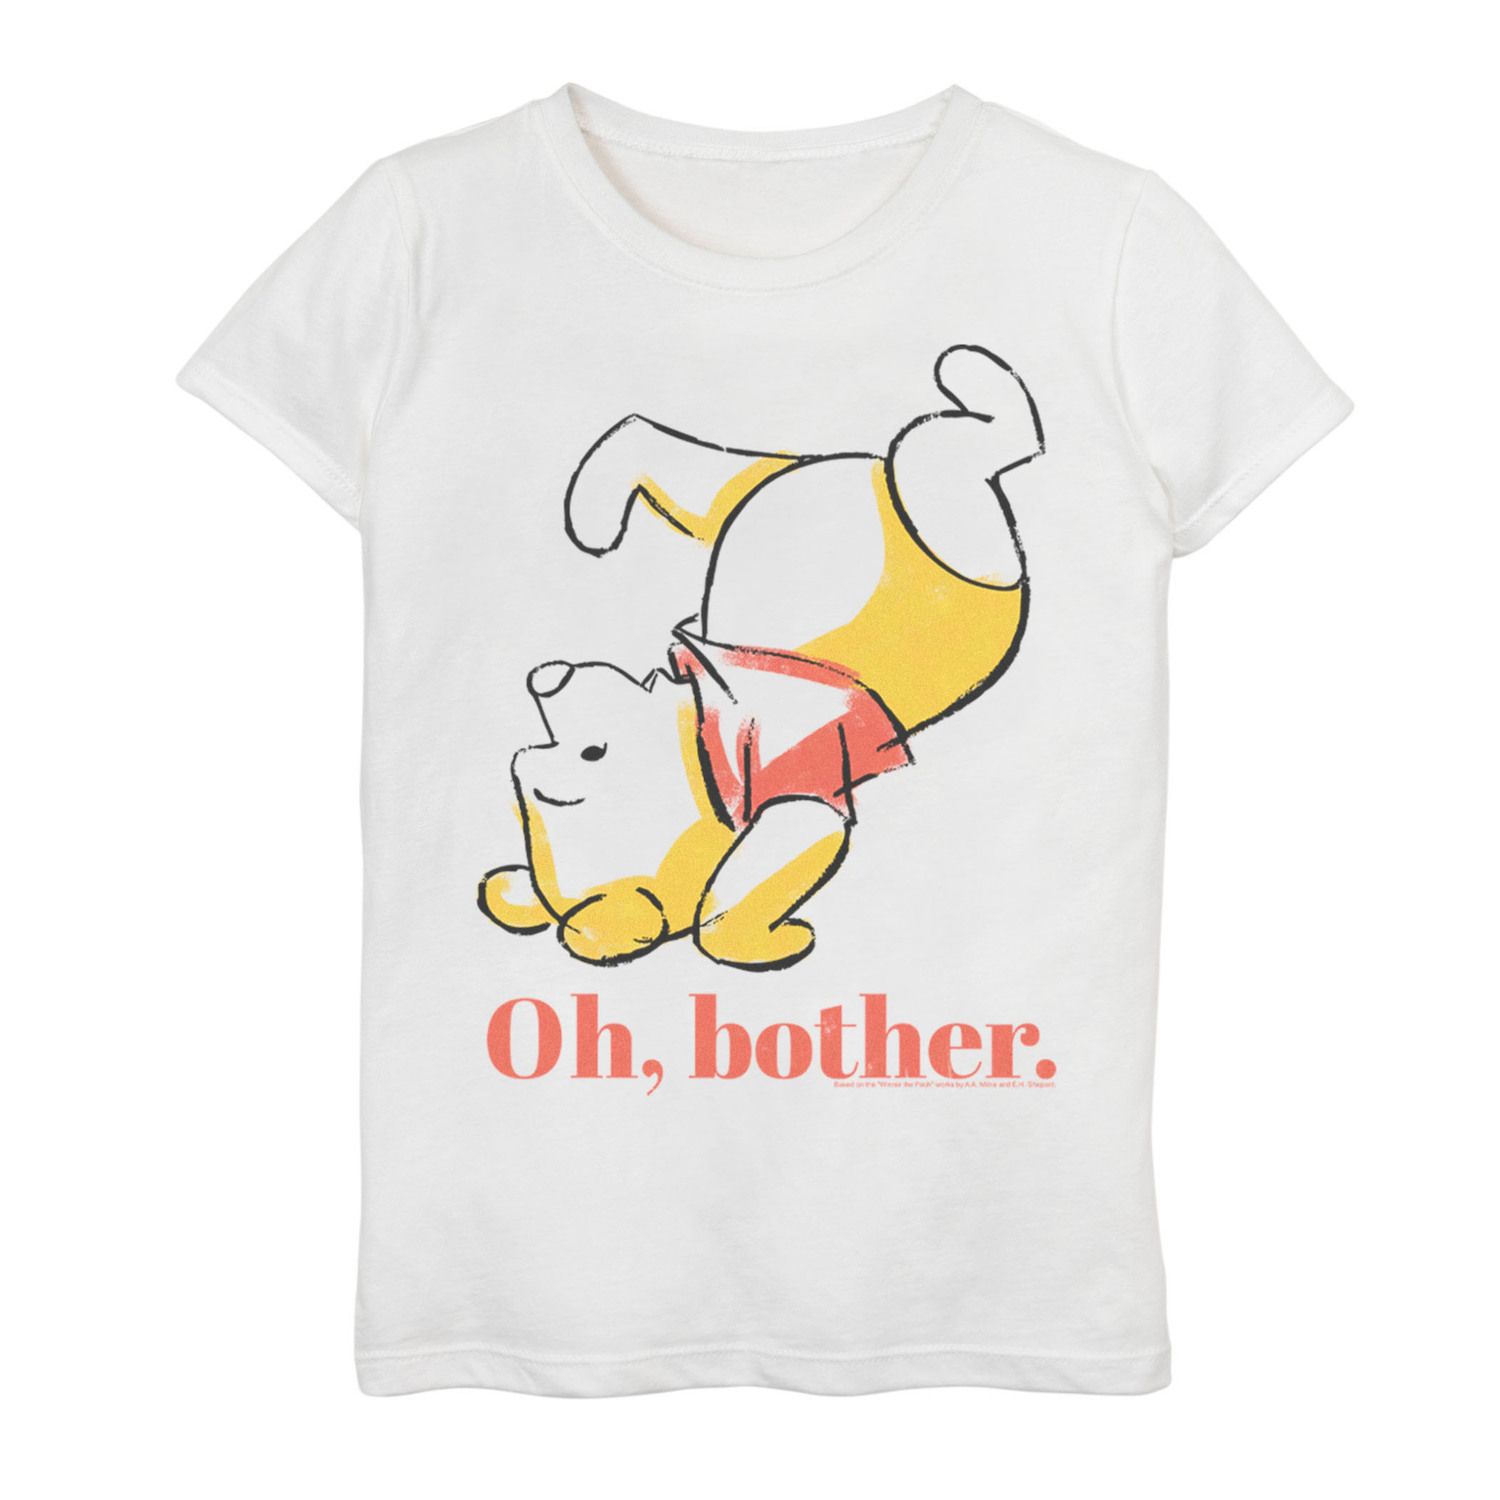 Image for Disney 's Winnie The Pooh Girls 7-16 Tumble Bear Oh Bother Graphic Tee at Kohl's.